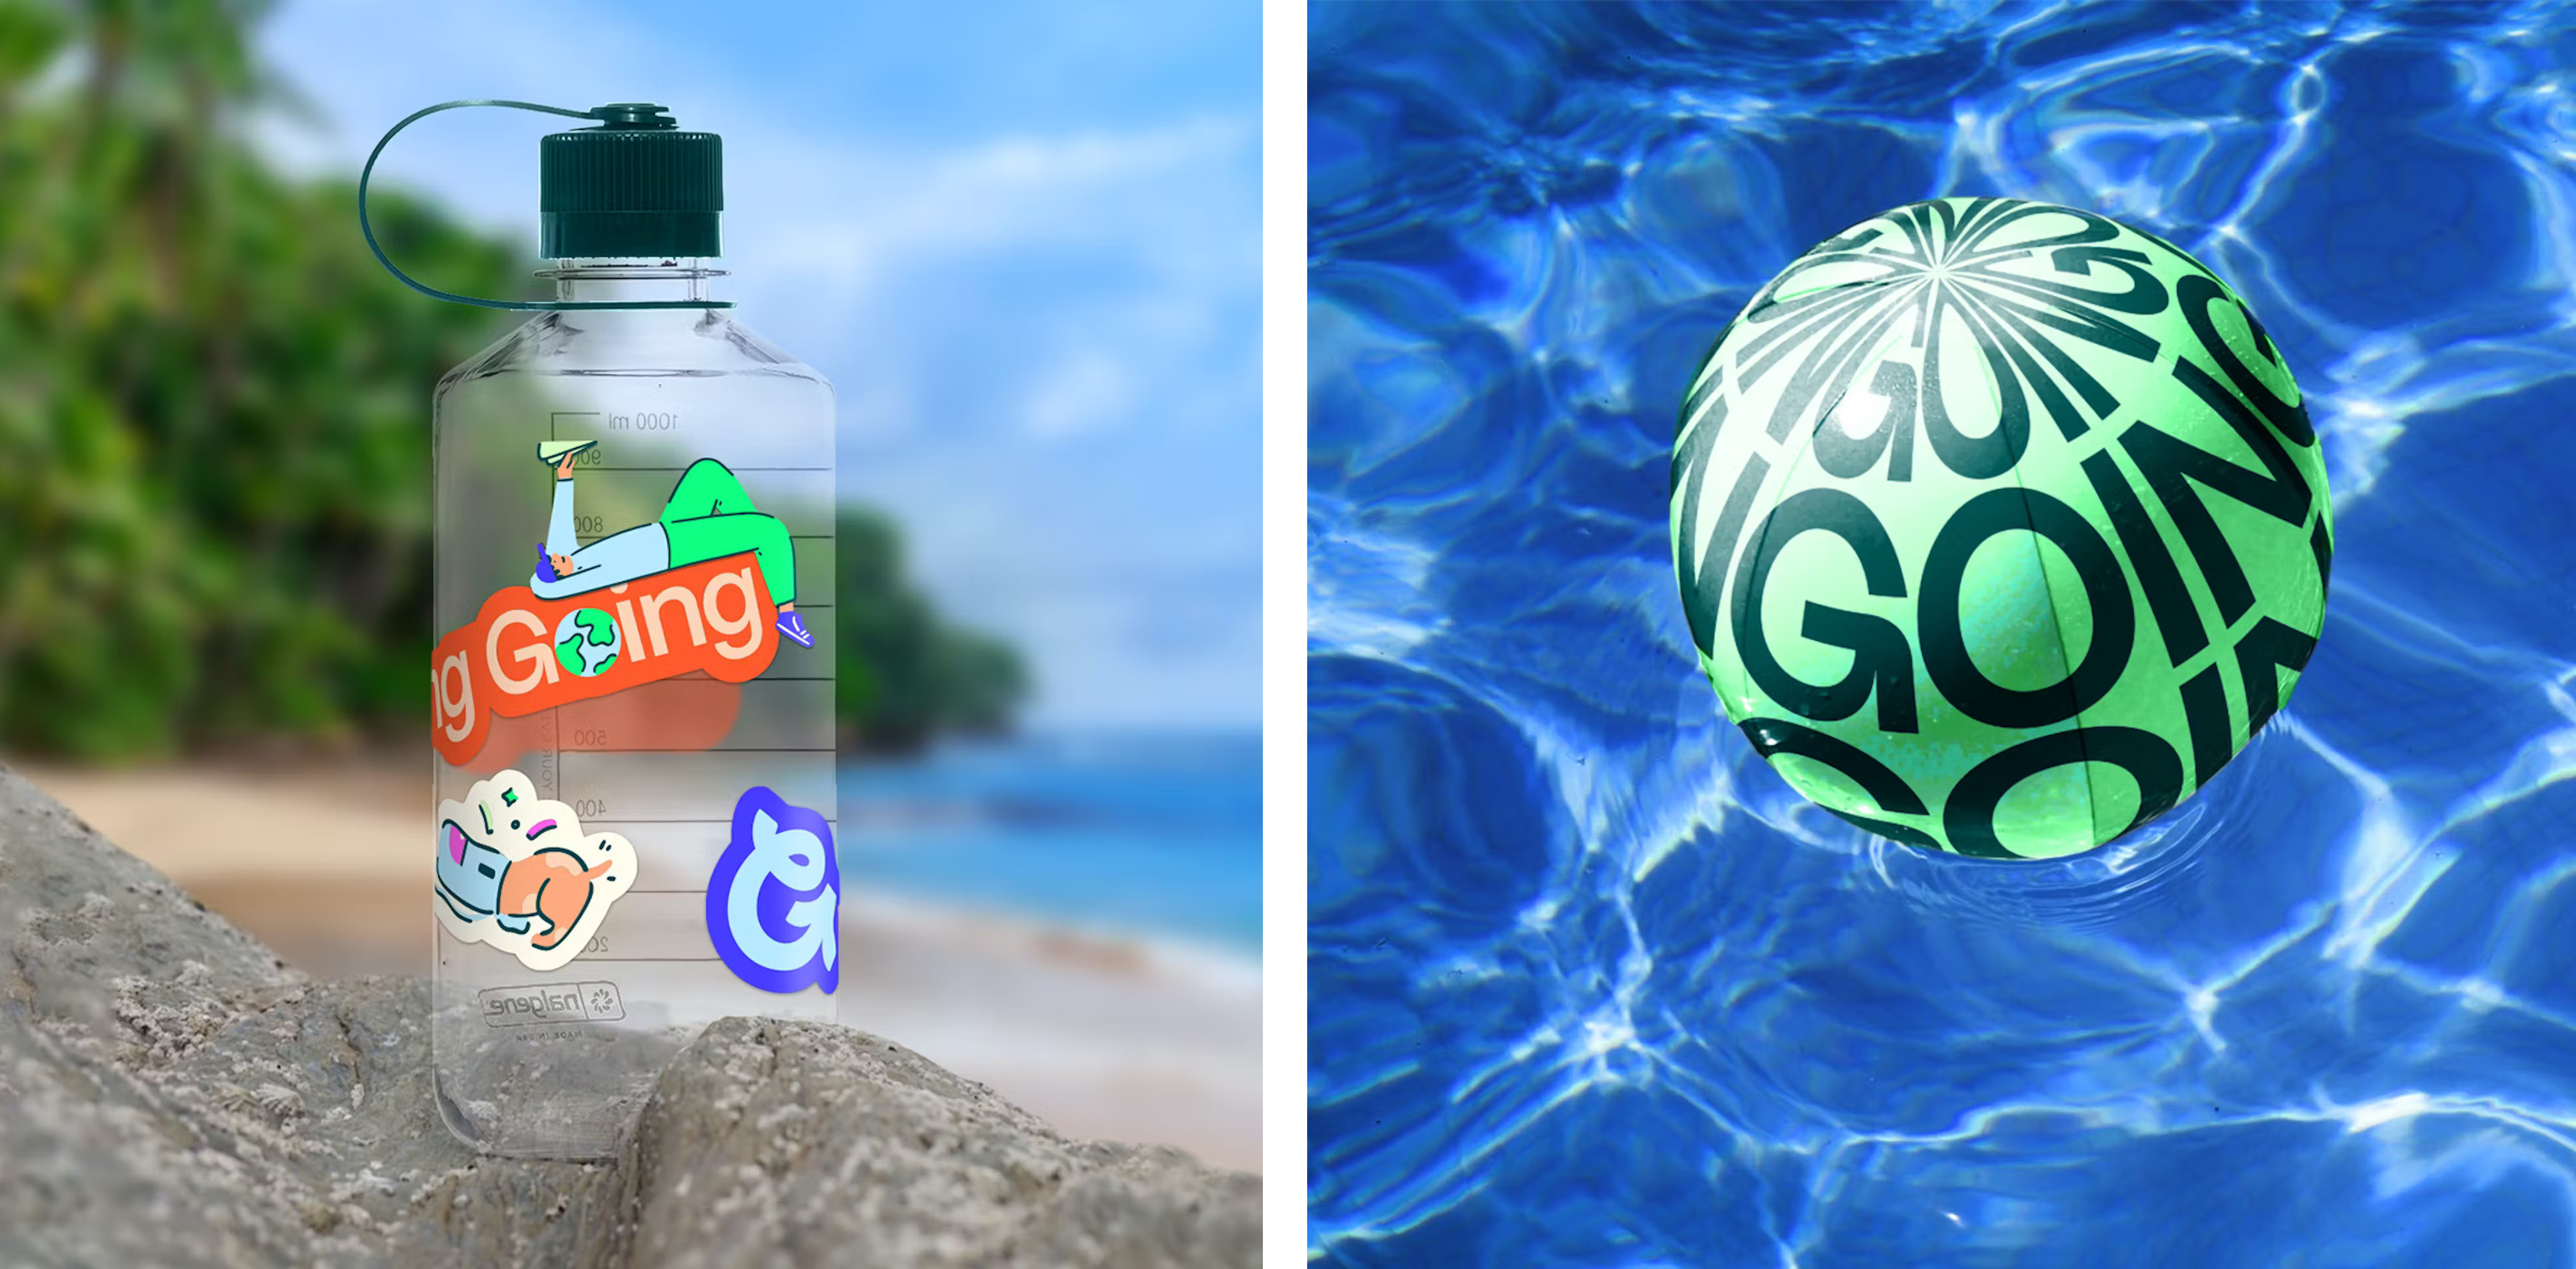 Brand identity and branded beach ball and water bottle by Design Studio for Going, formerly Scott’s Cheap Flights